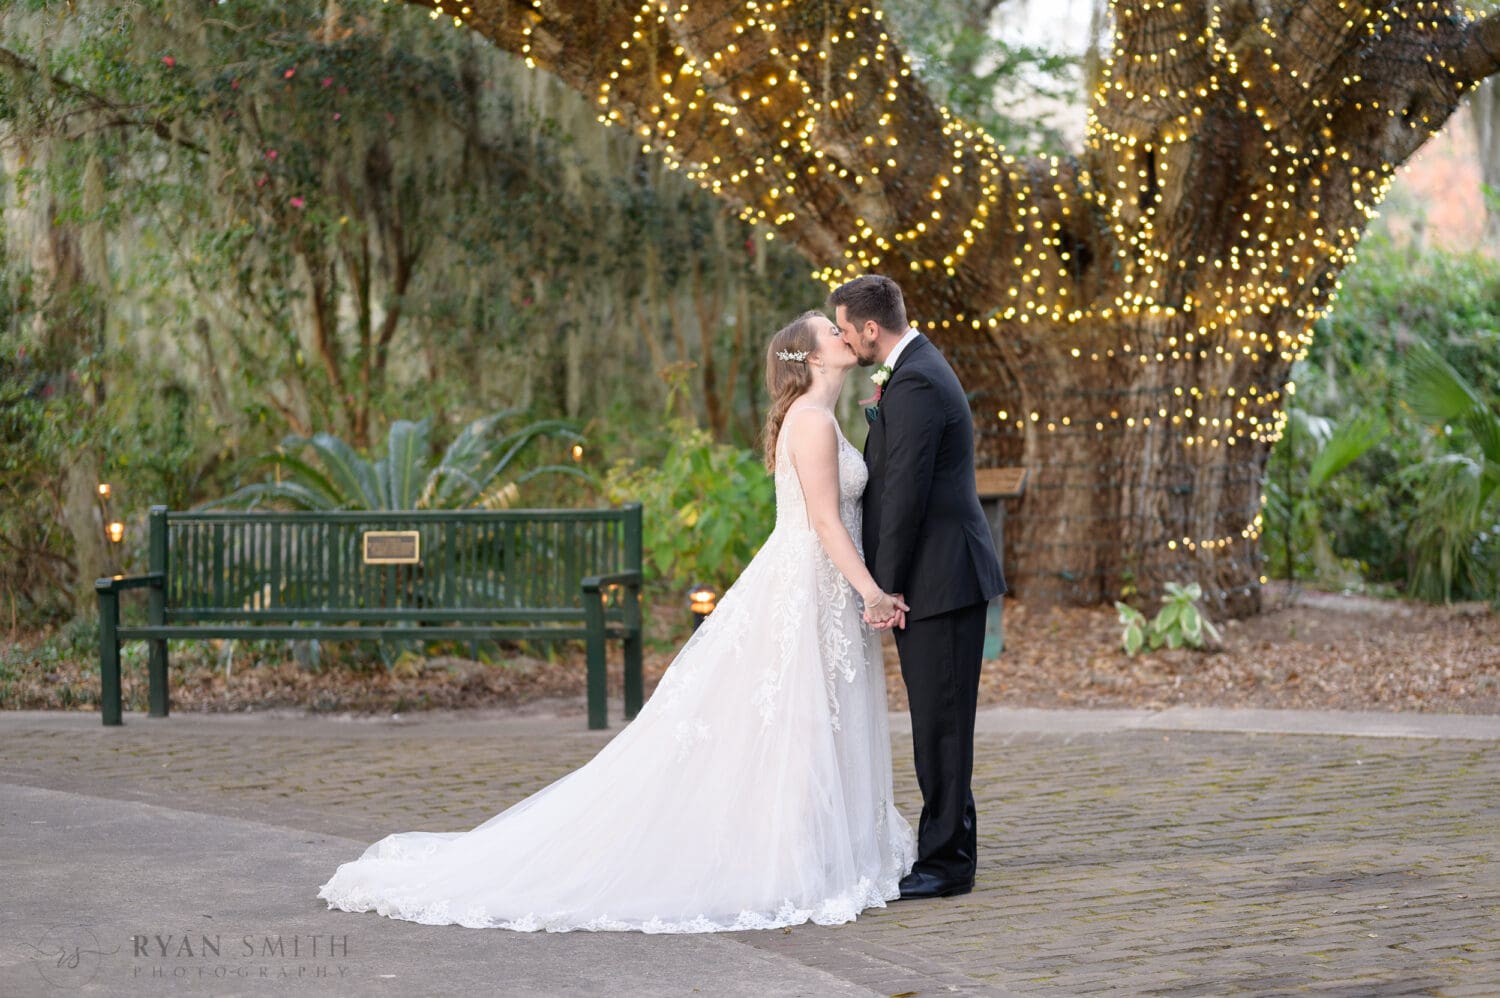 Kiss in front of the ancient tree - Brookgreen Gardens